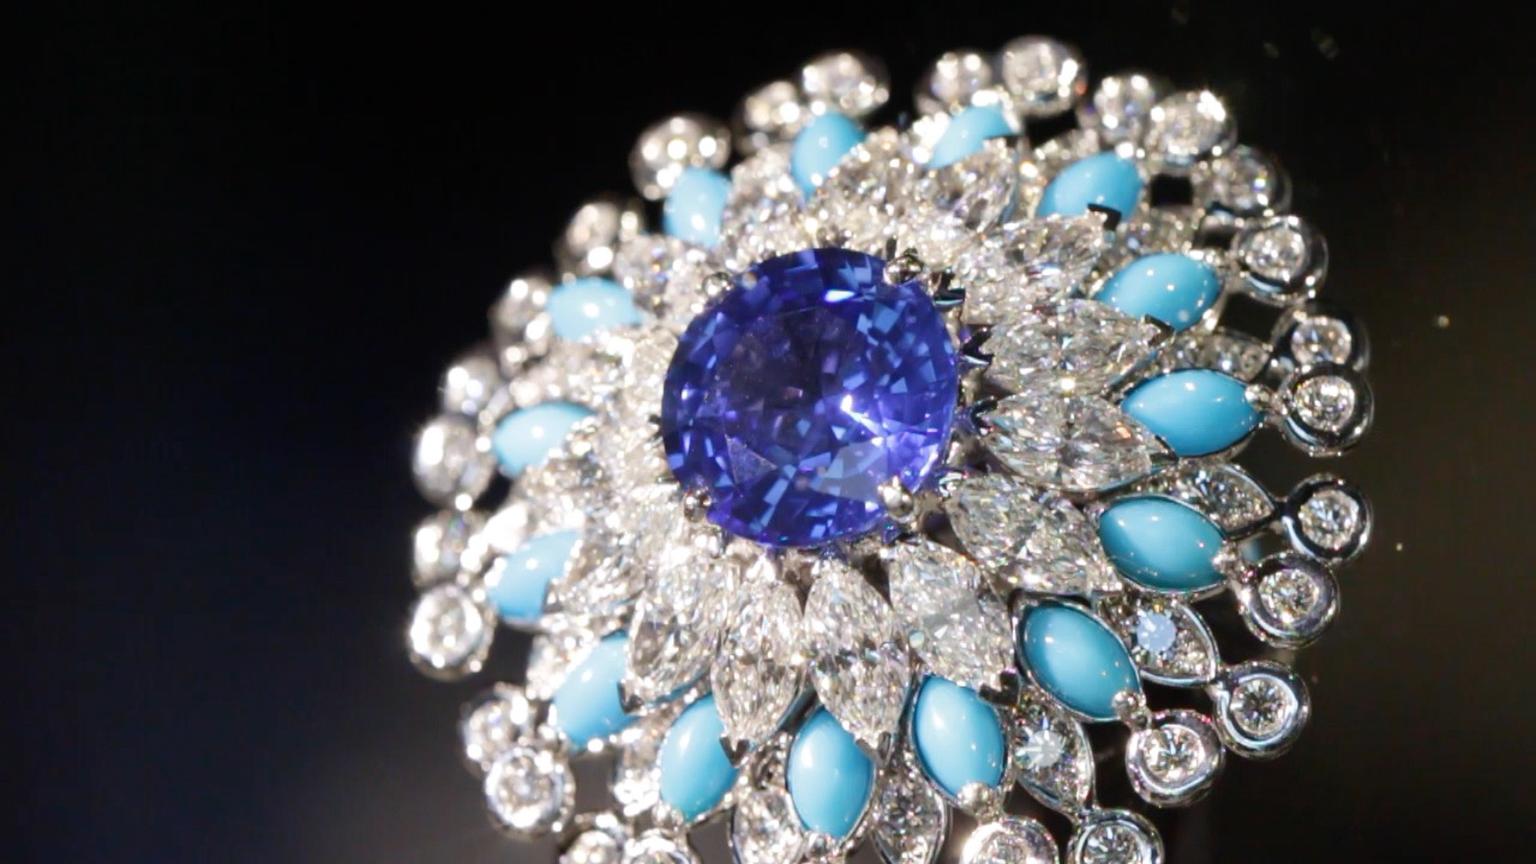 Piaget's sapphire, multi-shaped diamonds and turquoise bead ring- as seen during my recent trip to the 2014 Biennale des Antiquaires- was big and bold yet perfectly elegant.